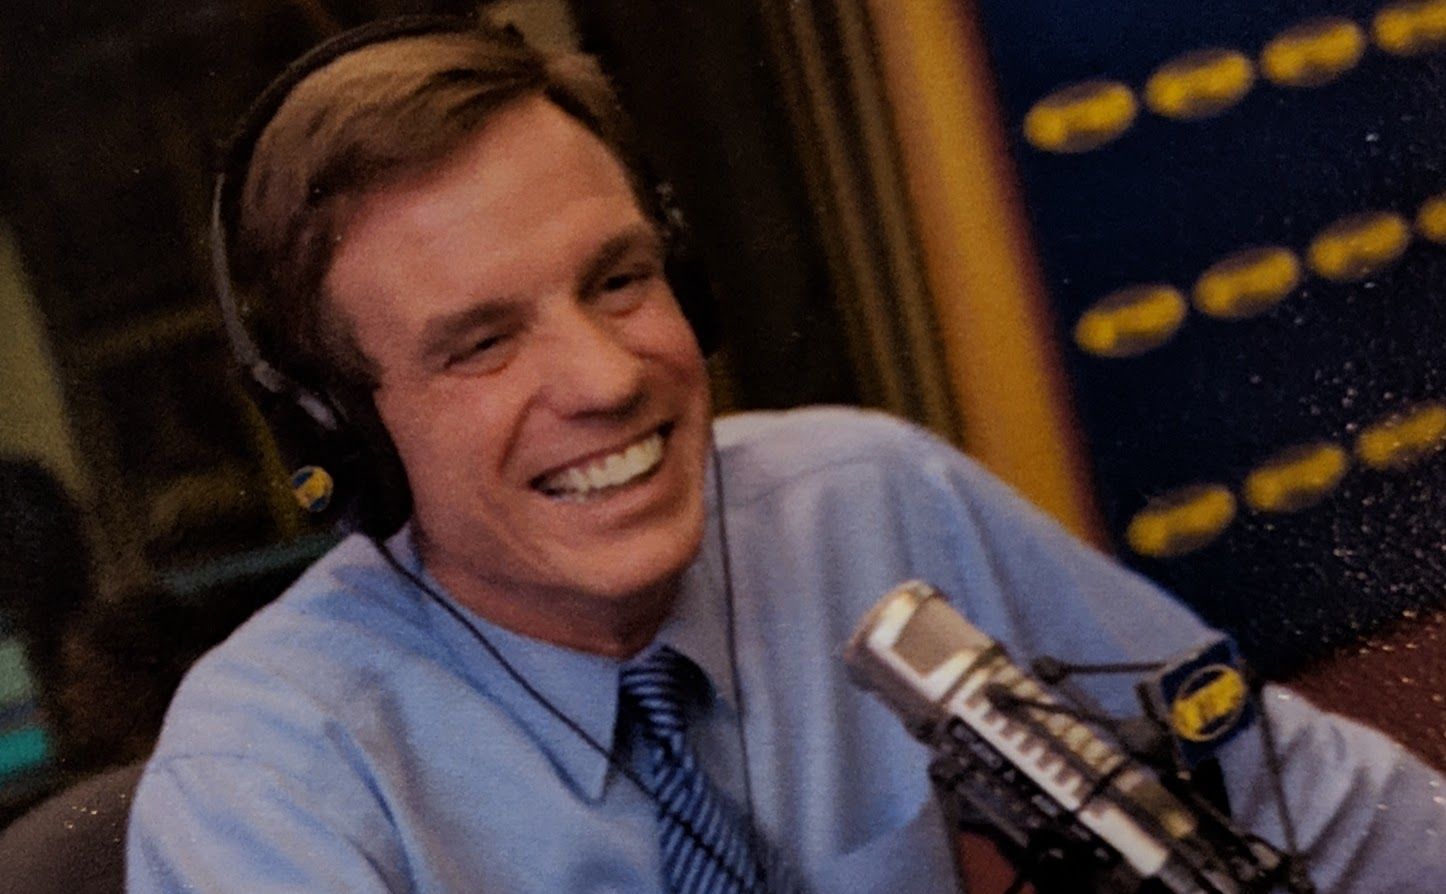 Sen. Mark Warner — pictured here when he was governor of Virginia — was one of the many area governors who have stopped by the studios as part of WTOP's "Ask the Governor" program. (File photo)